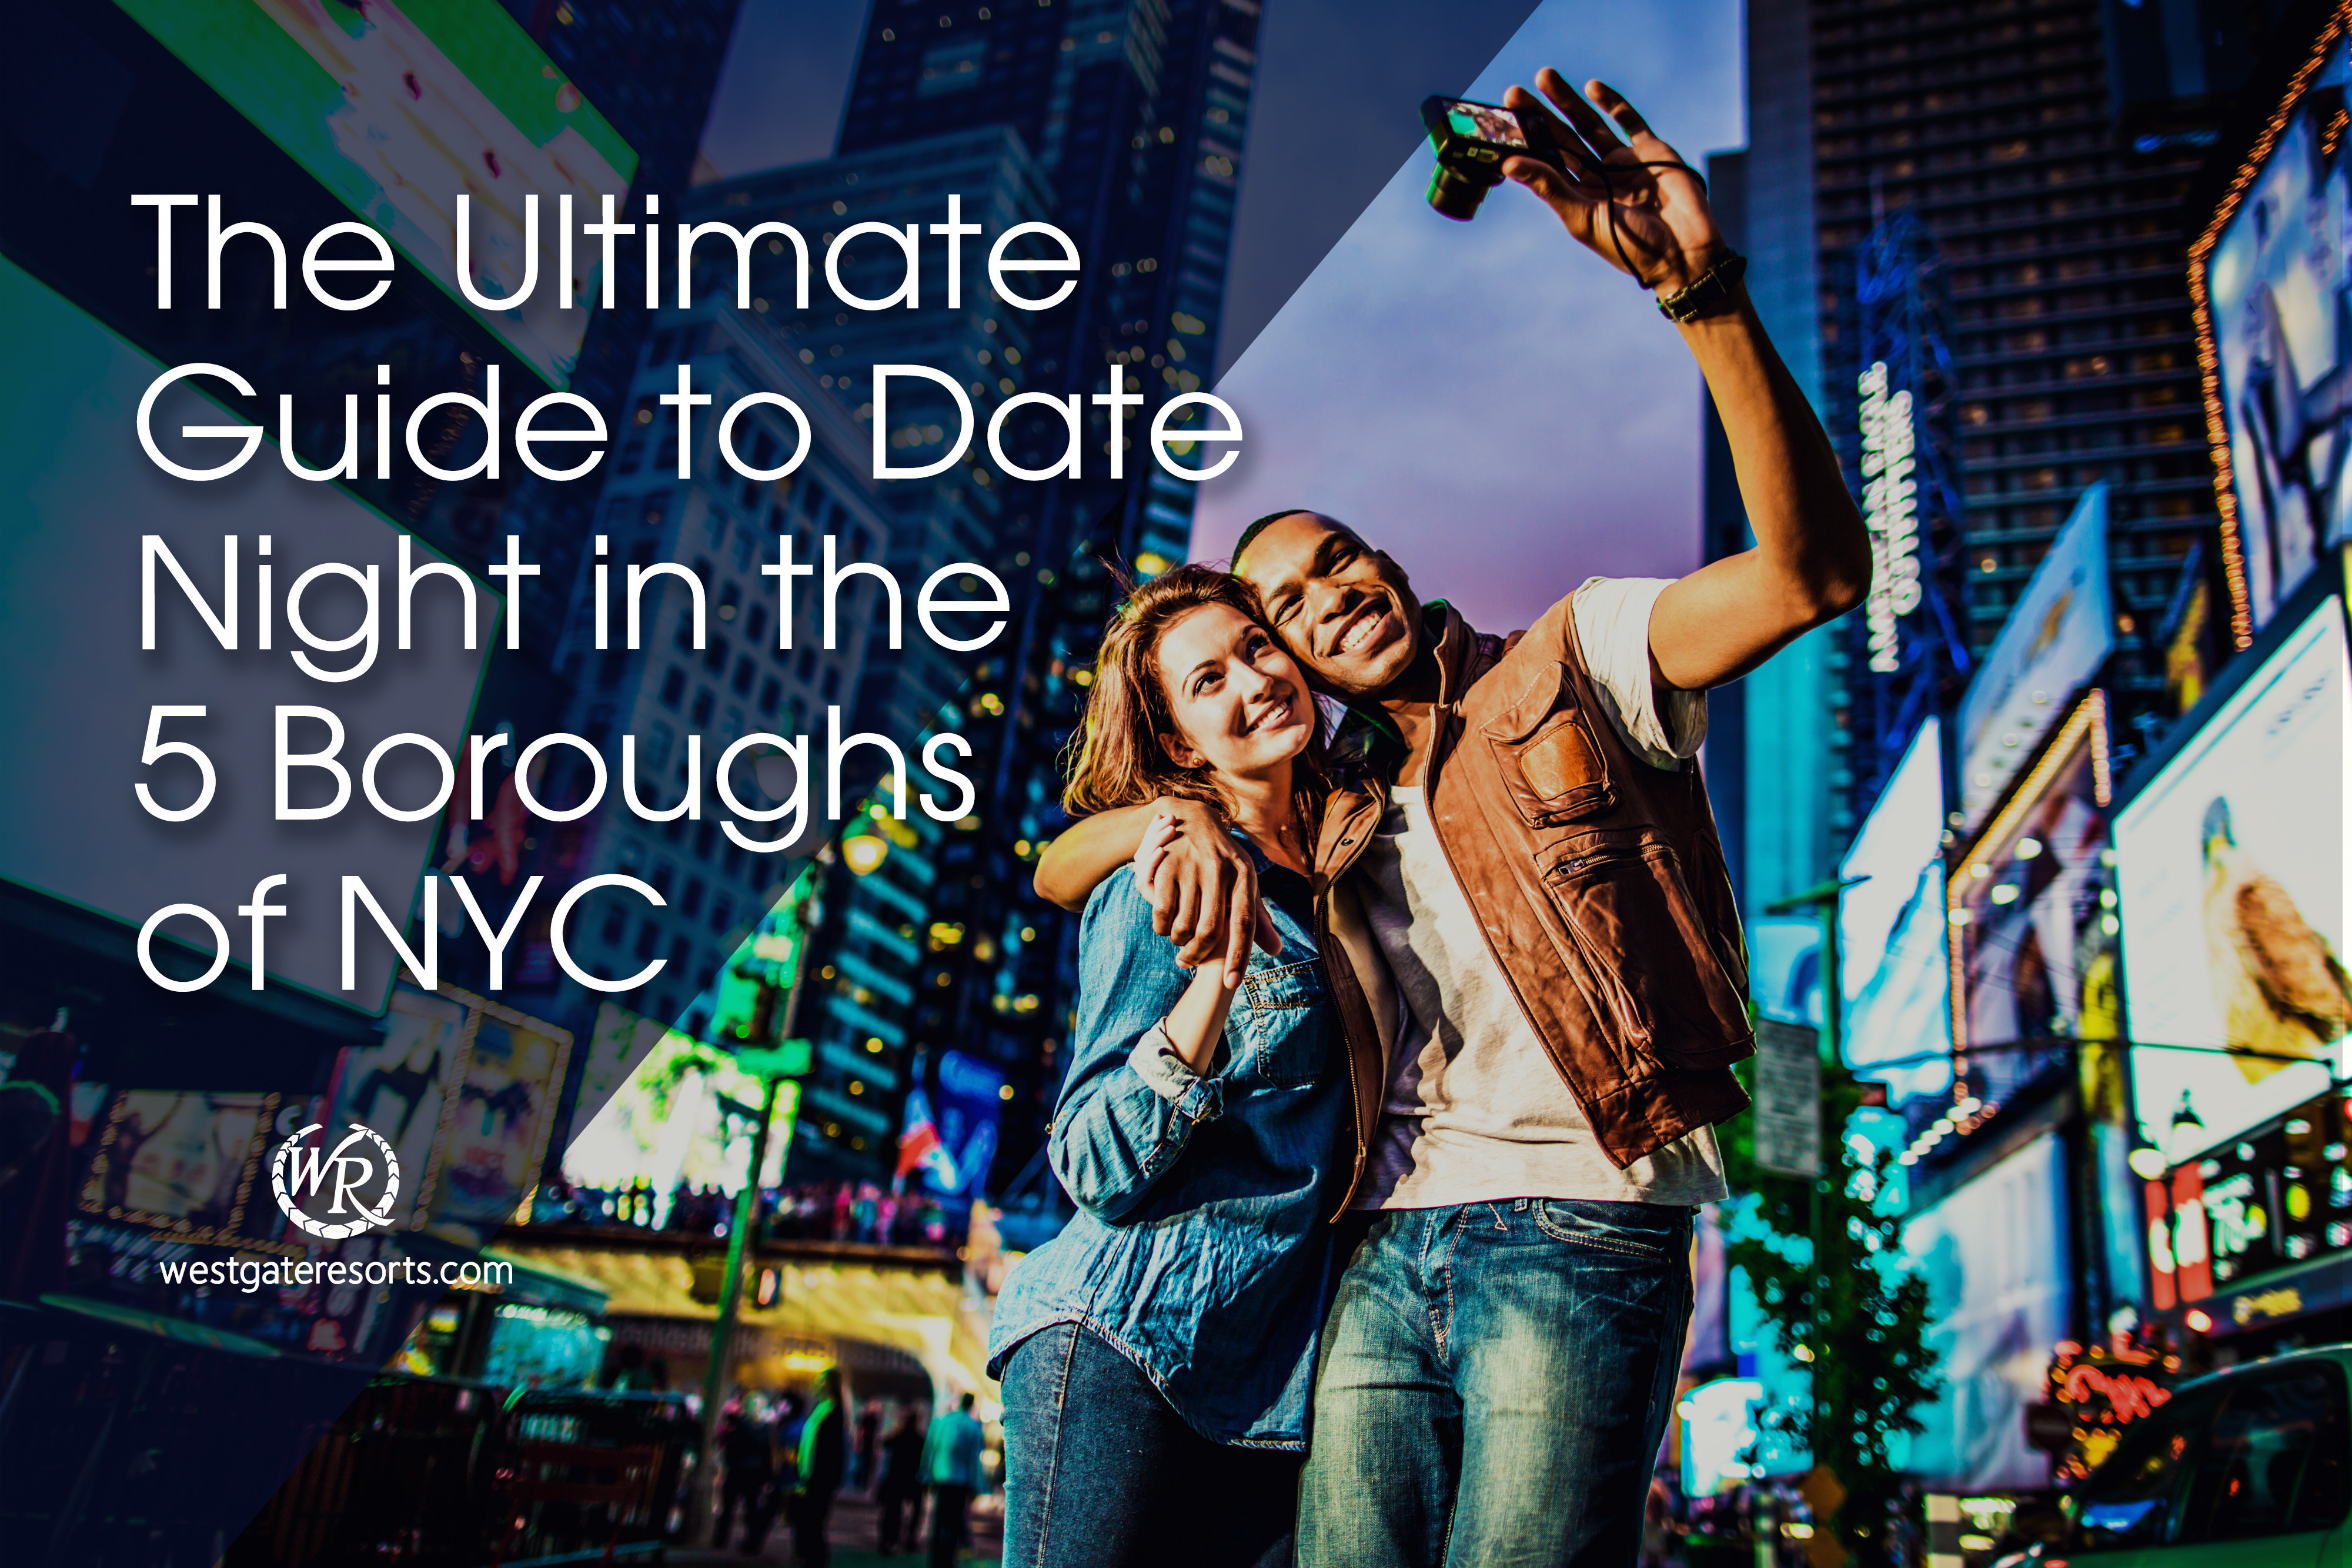 The Ultimate Guide to Date Night in the 5 Boroughs of NYC